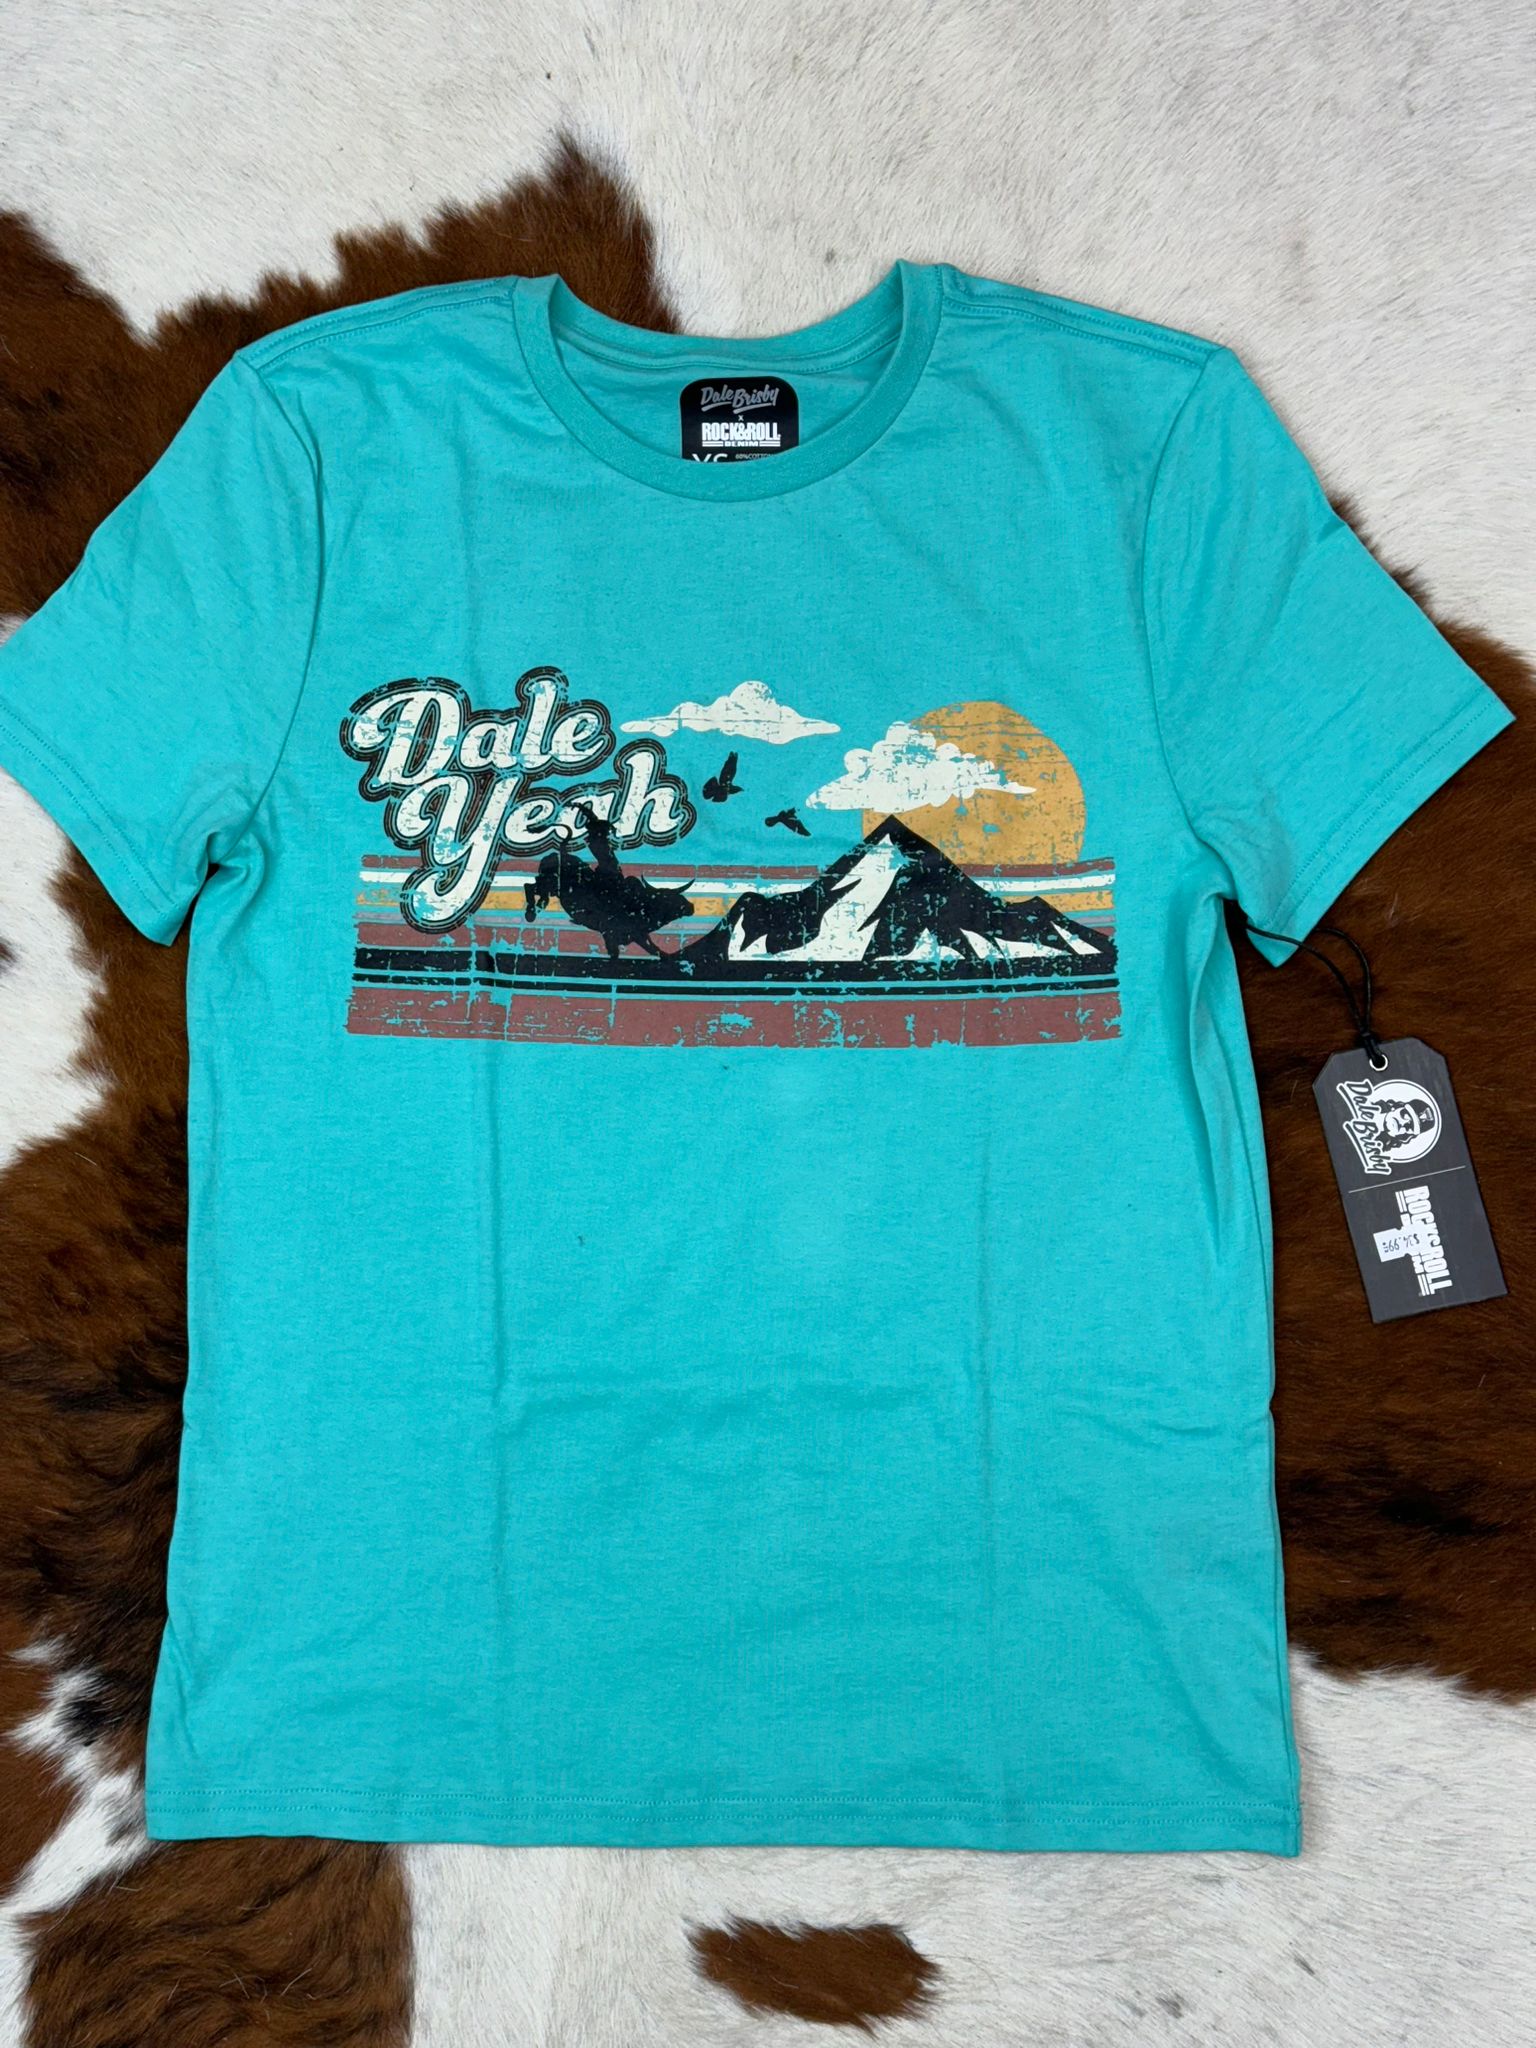 DALE BRISBY X ROCK&ROLL GRAPHIC TEE WESTERN MOUNTAIN TURQUOISE SHORT SLEEVE T-SHIRT